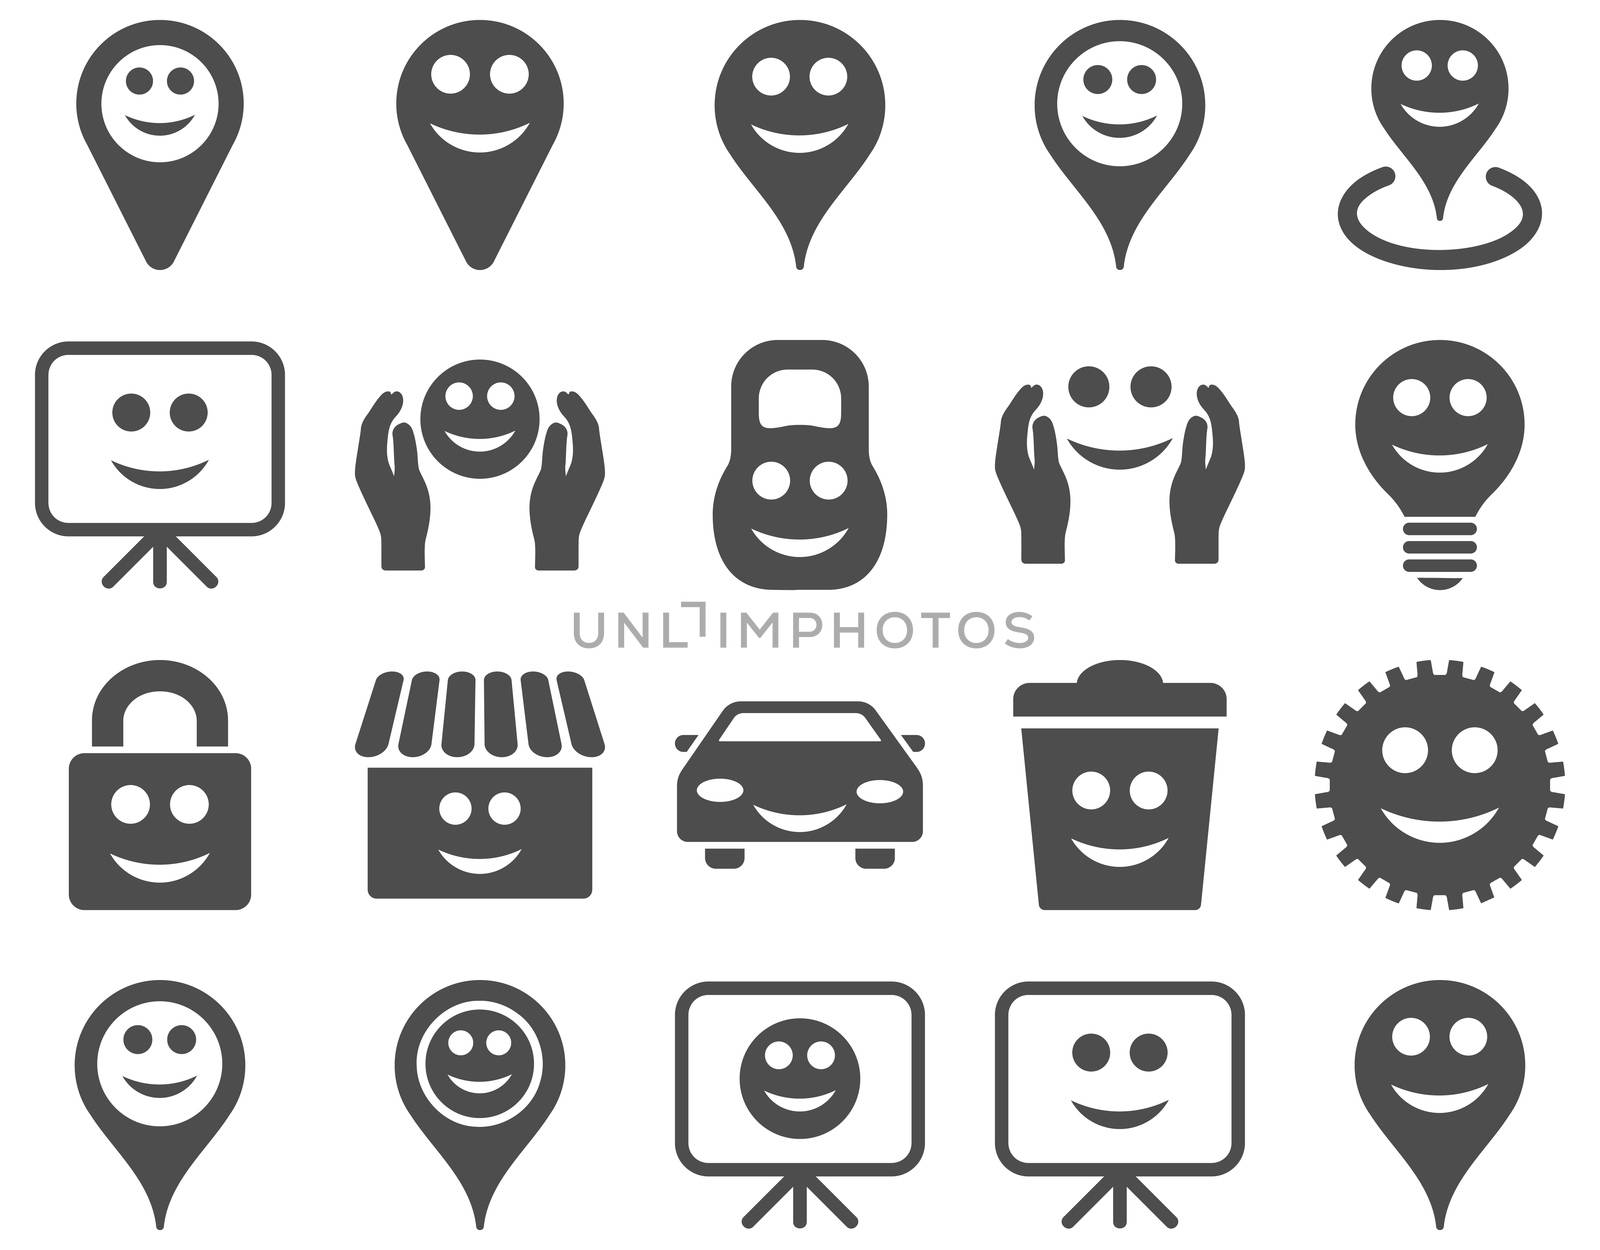 Tools, options, smiles, objects icons by ahasoft